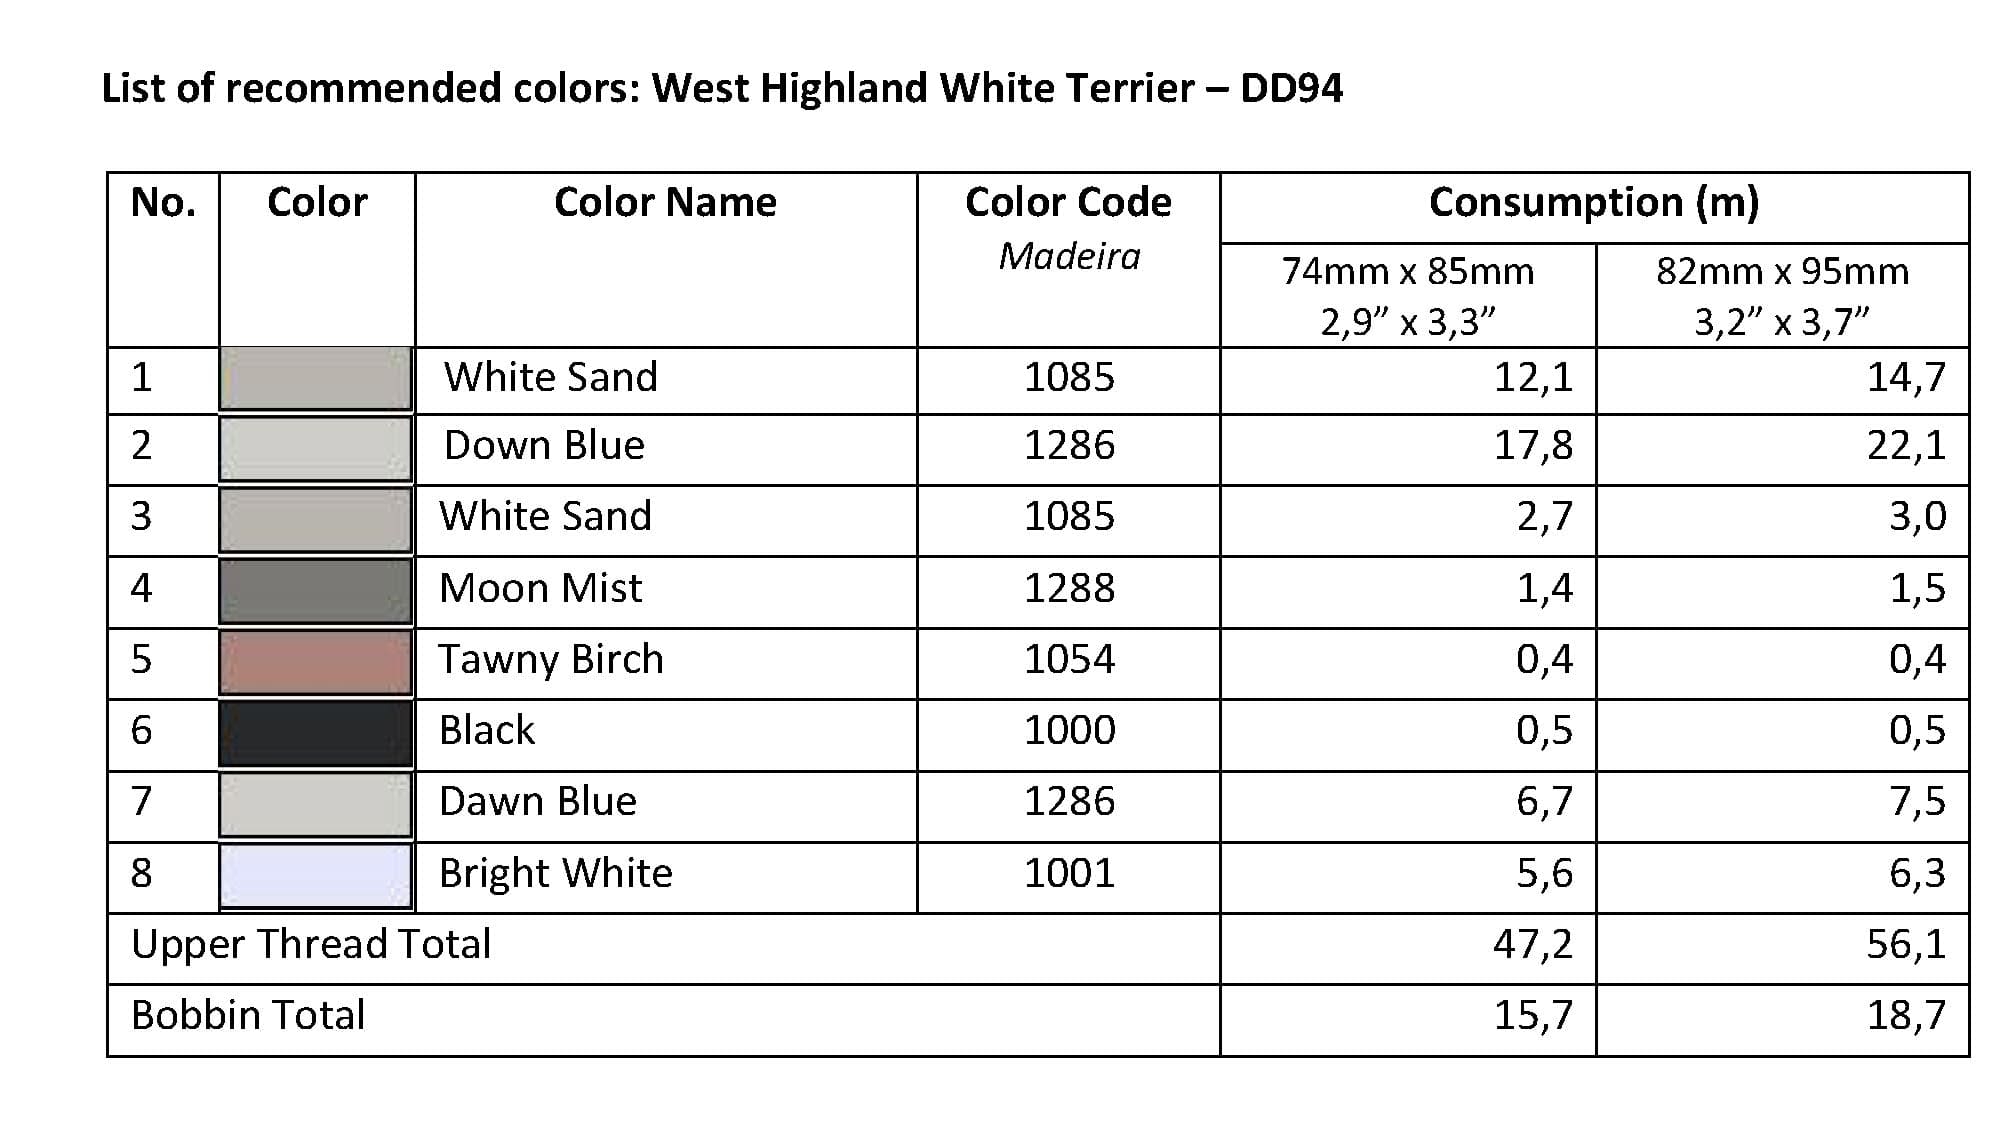 List of Recommended Colors -  West Highland White Terrier DD94